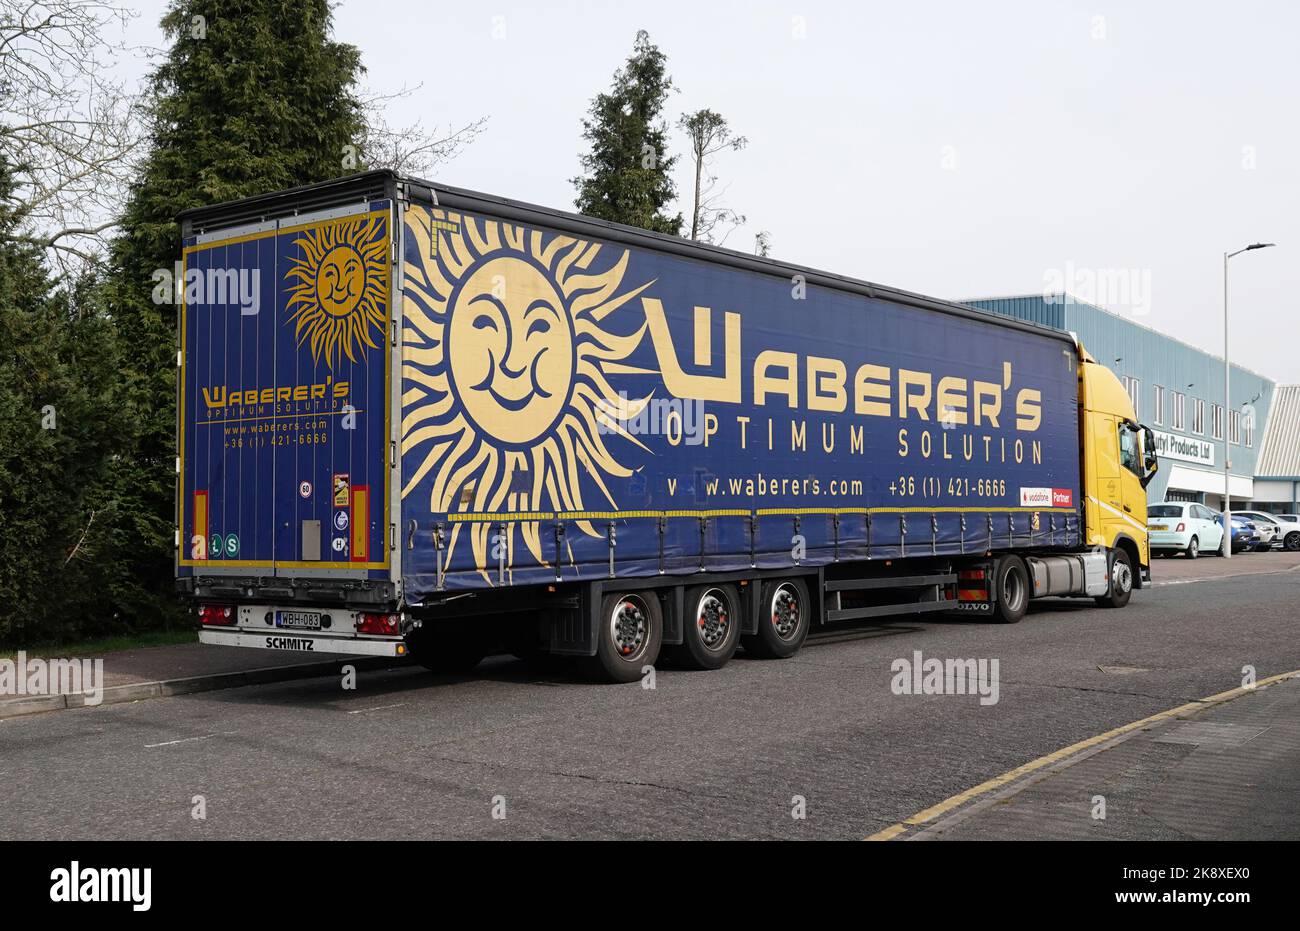 A Waberers Optimum Solution truck parked in a road on an industrial estate Stock Photo